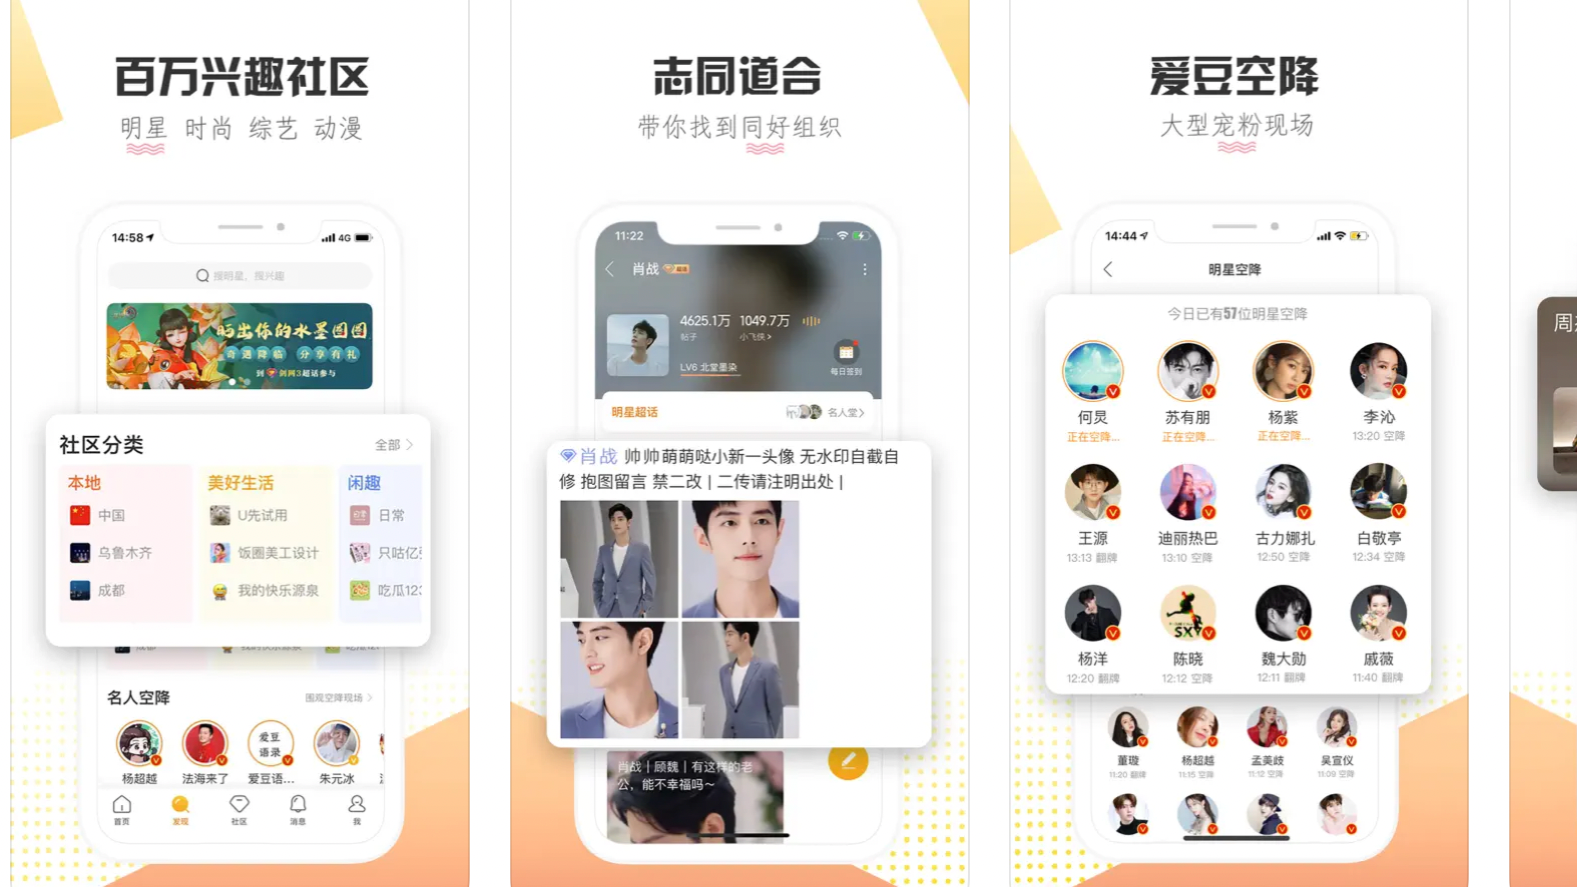 Weibo’s new app Planet could challenge short-video giant Douyin. It could also land it in hot water for promoting celebrity culture. What should brands do? Photo: App Store